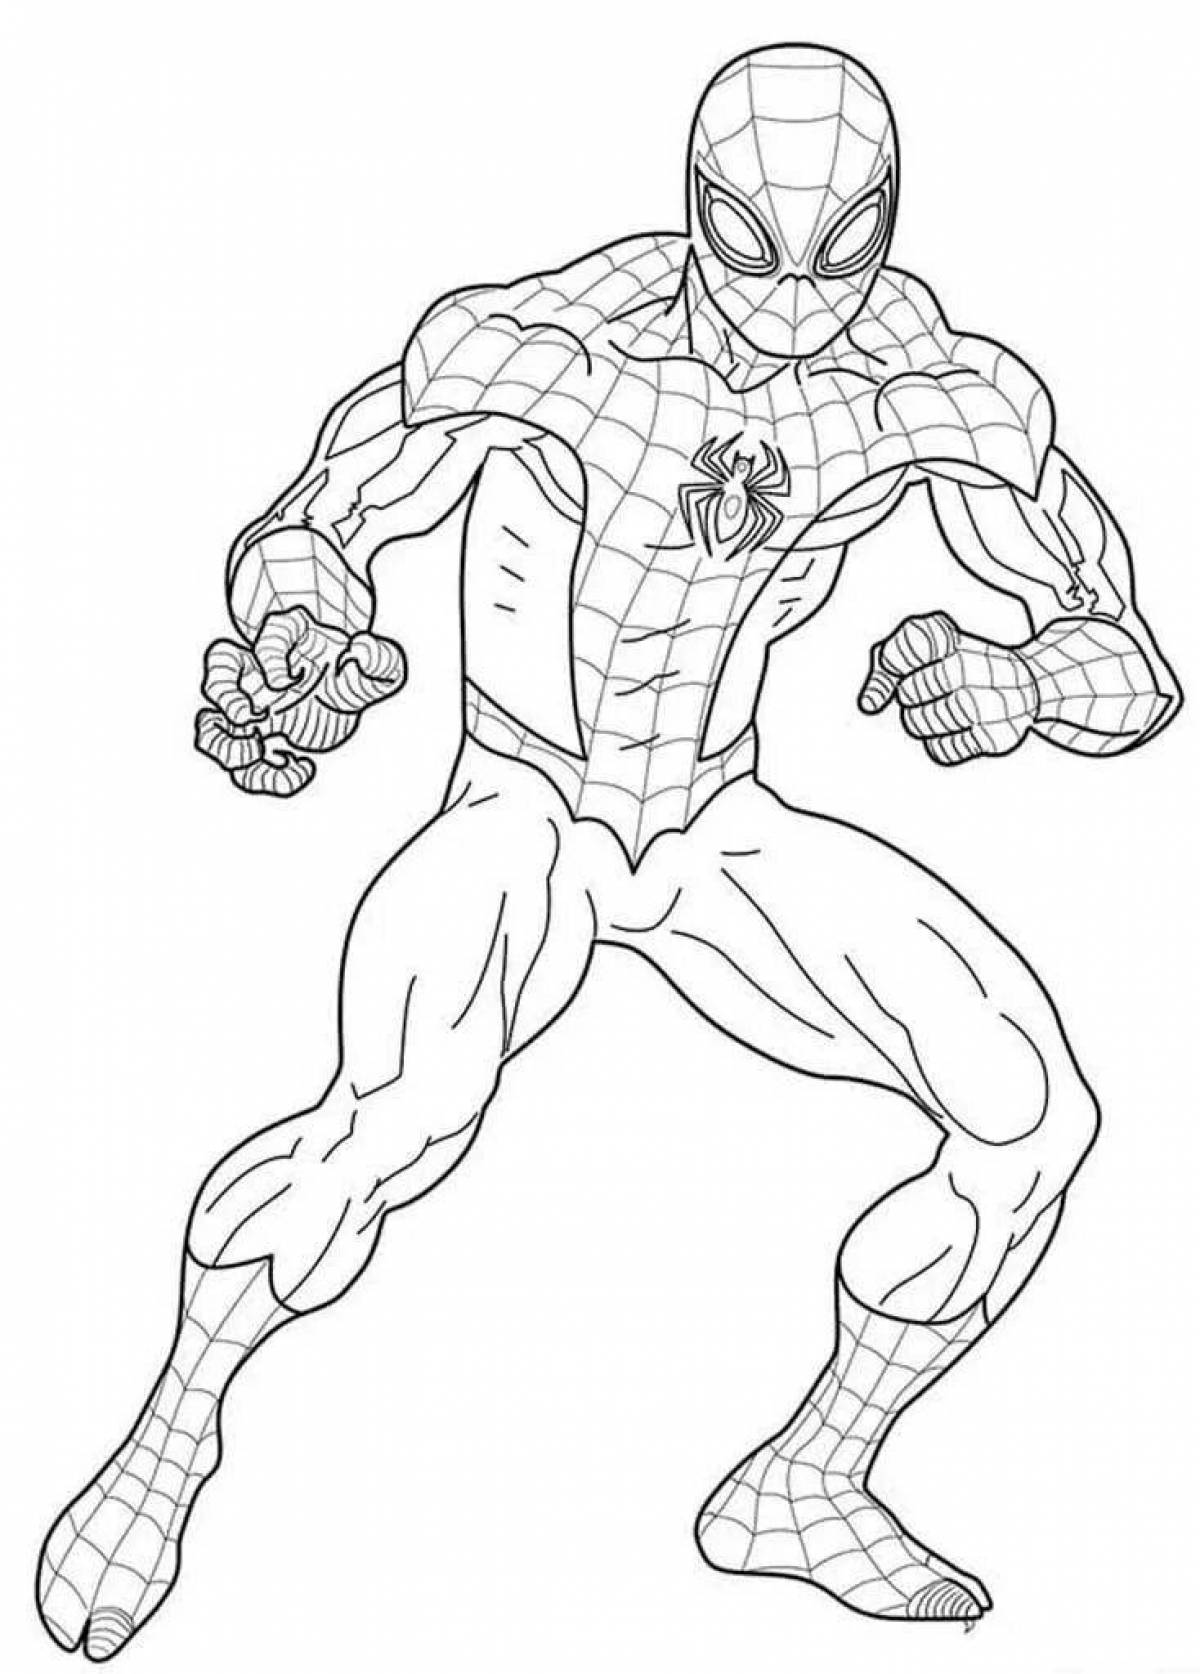 A wonderfully detailed Spiderman coloring page